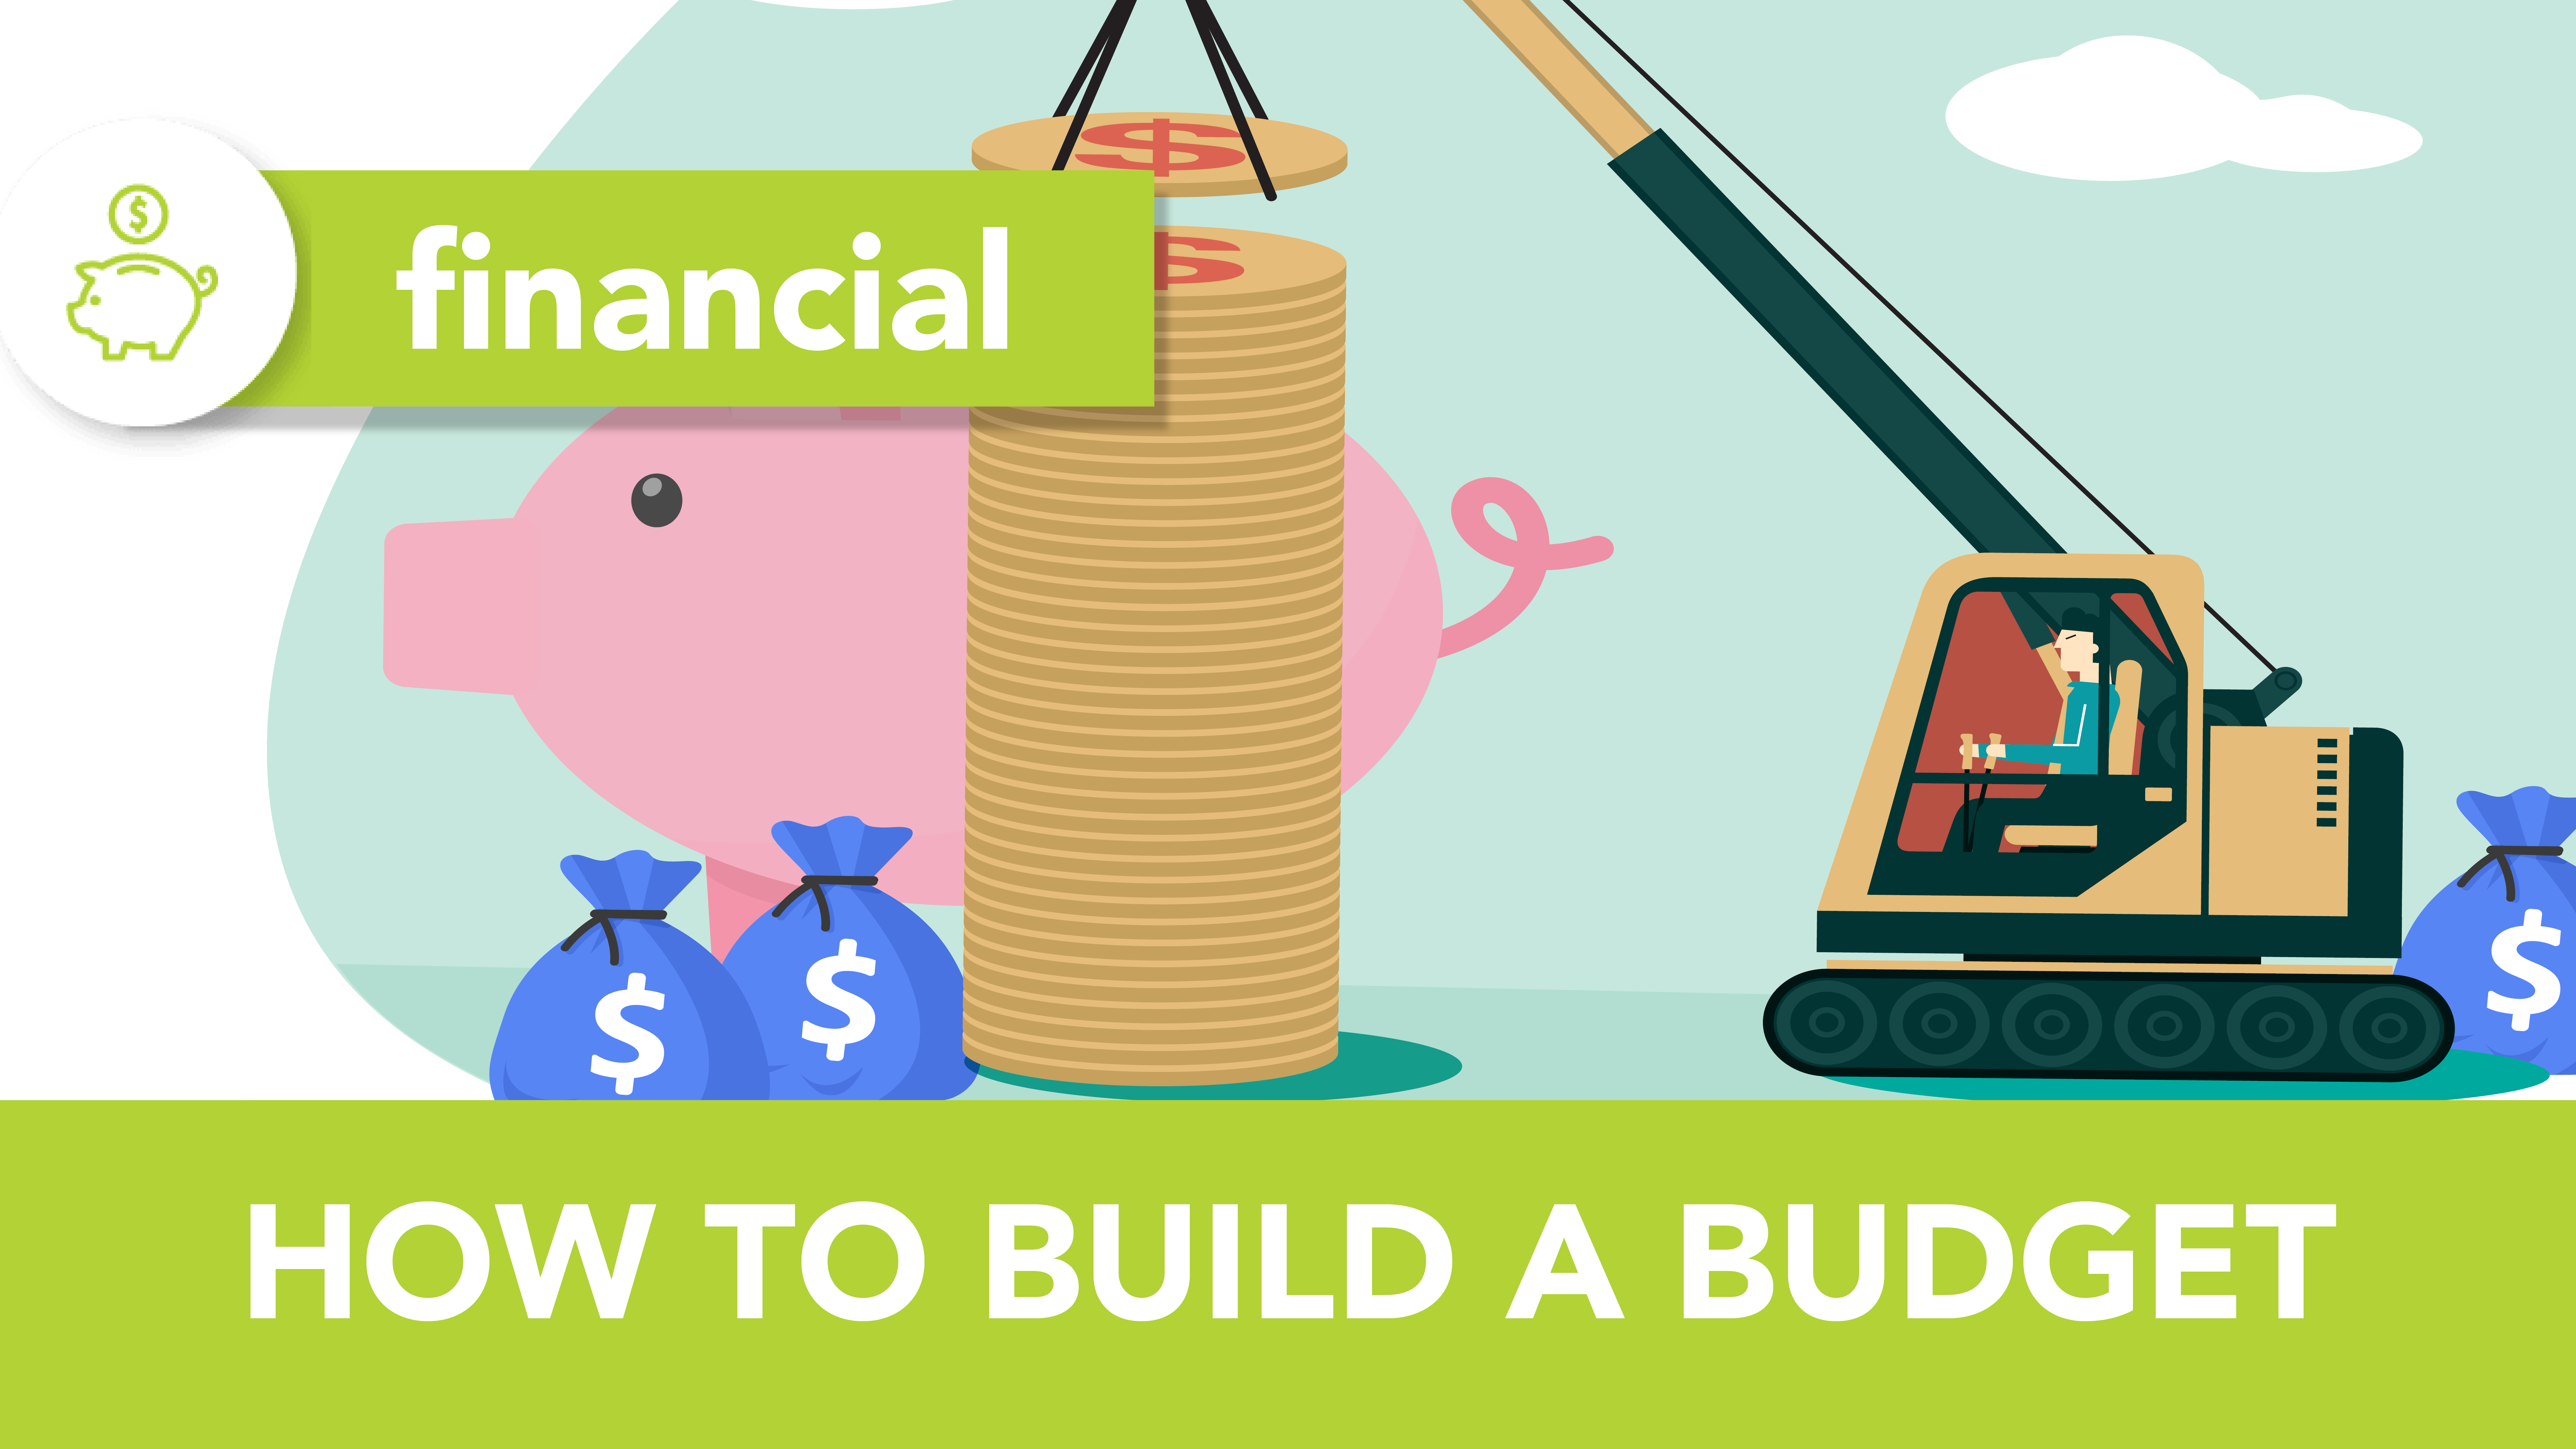 How to build a budget